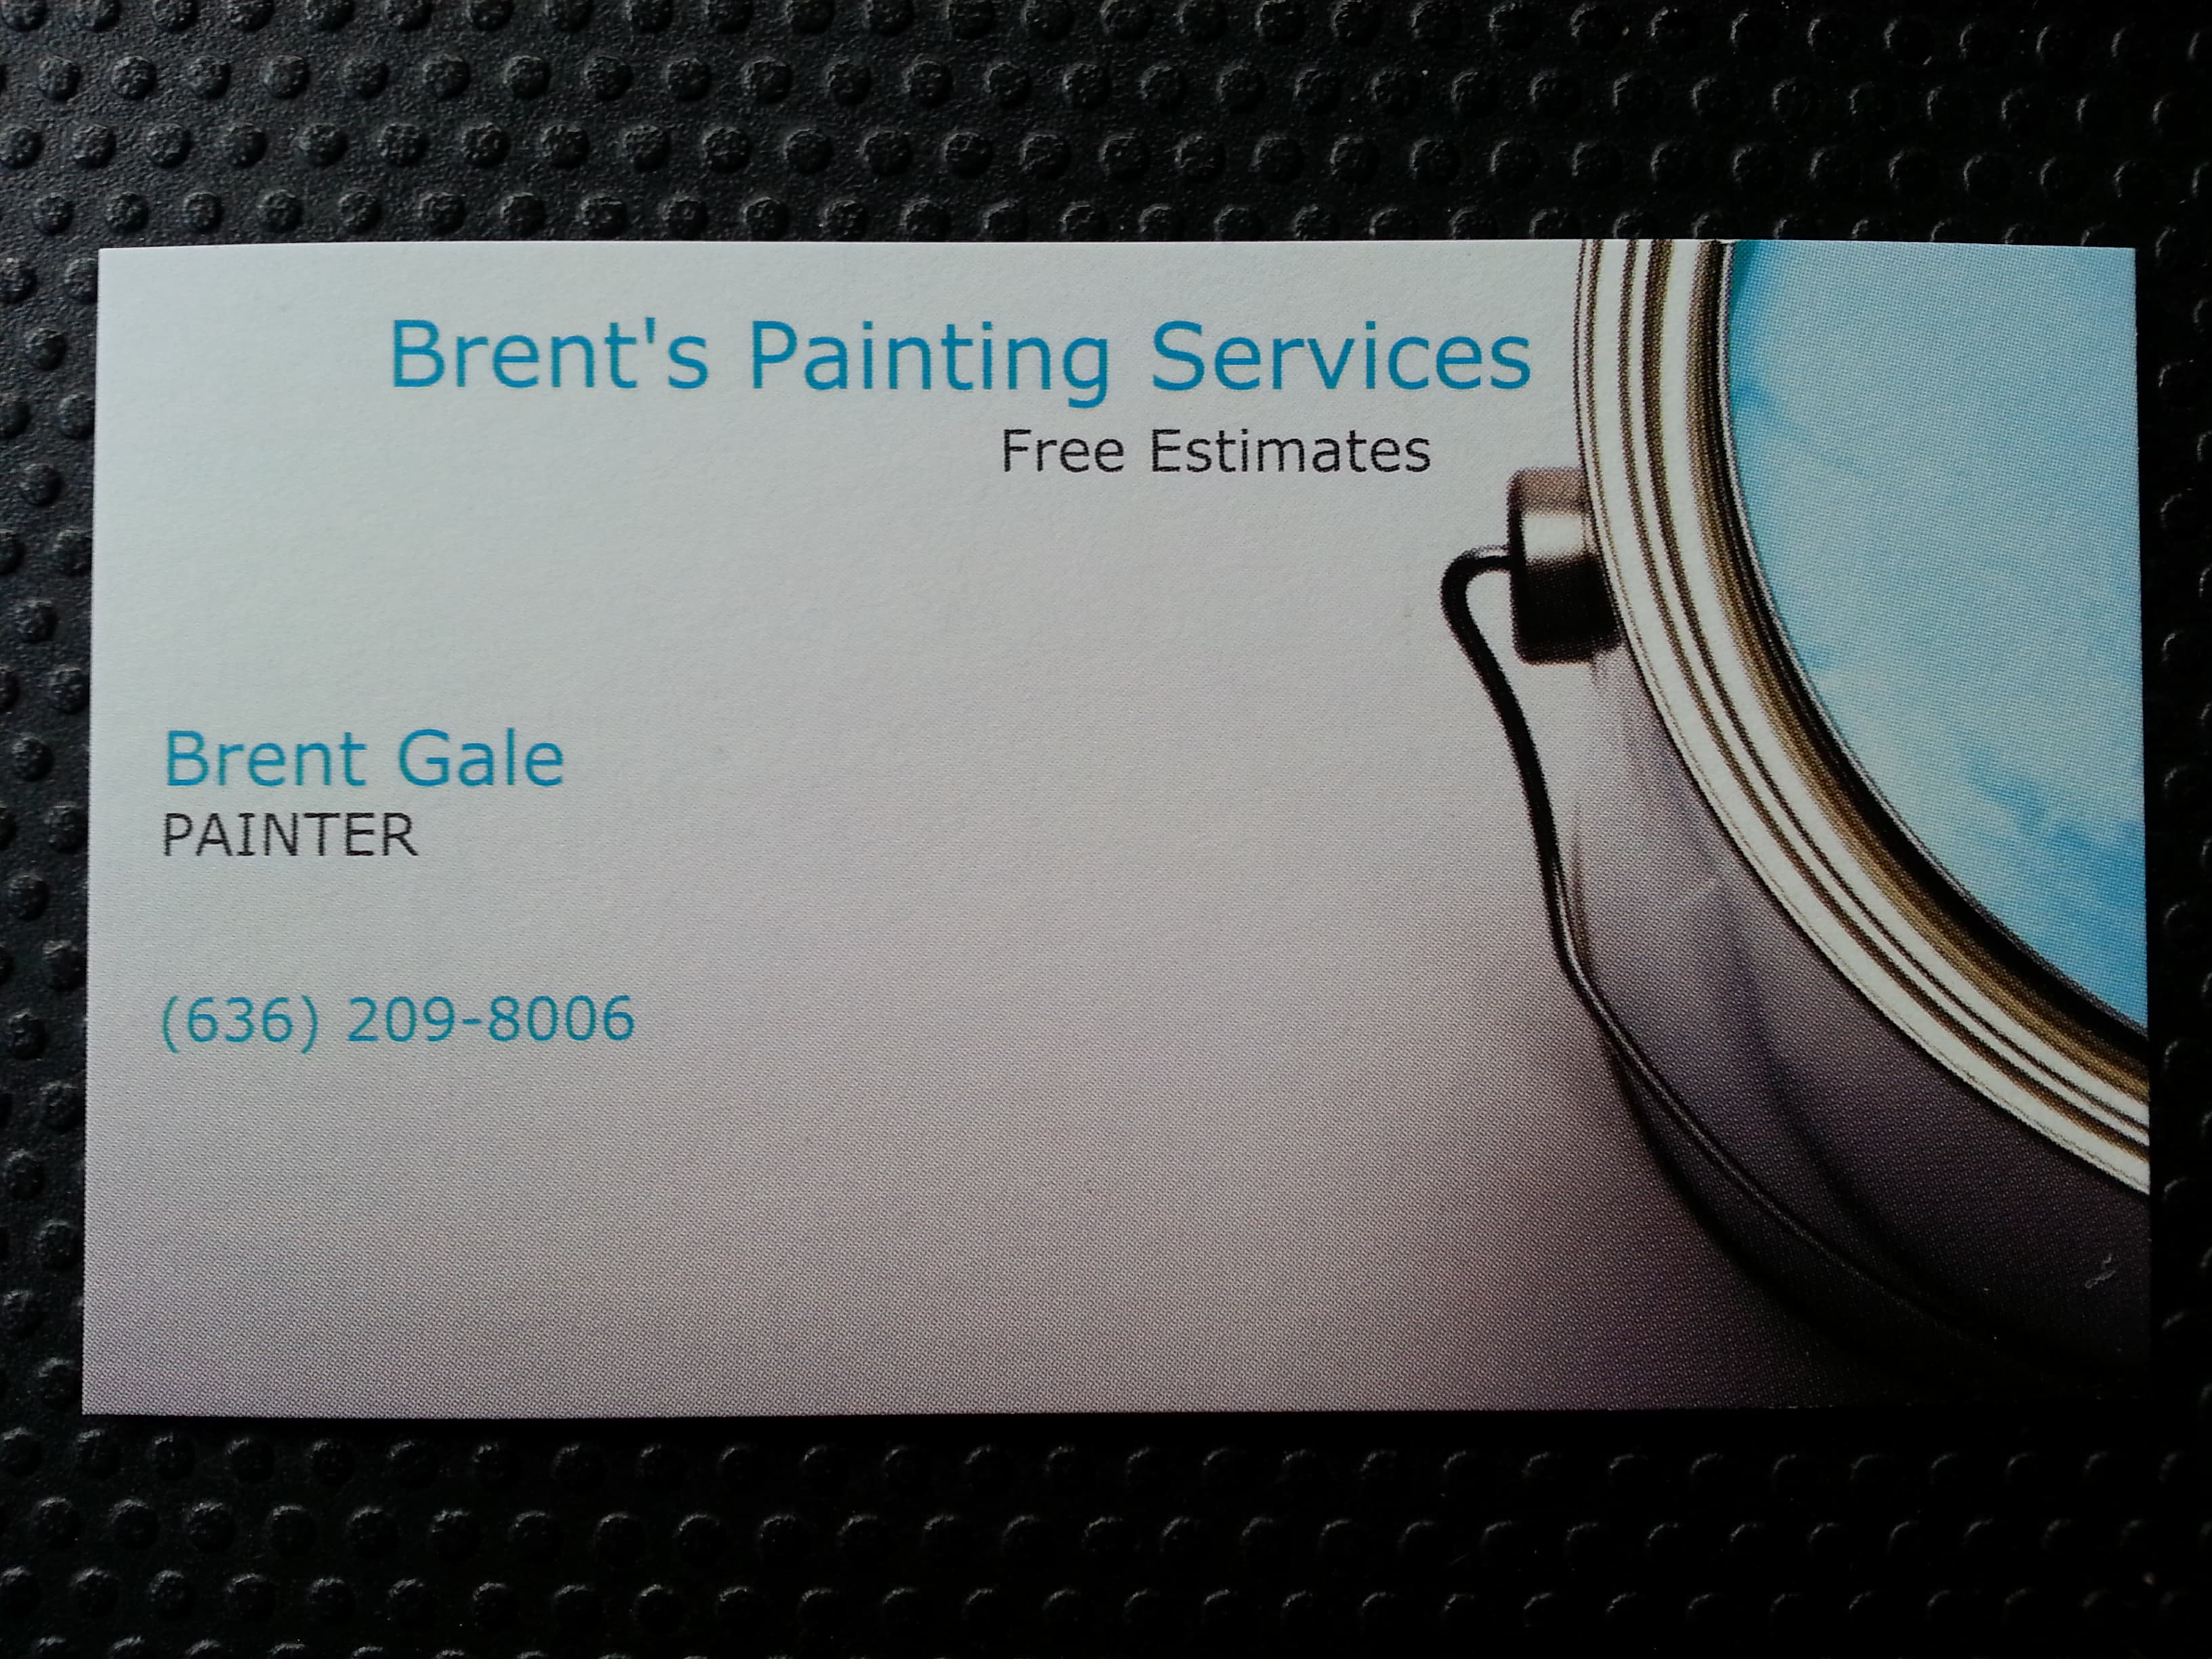 Brent's Painting Services